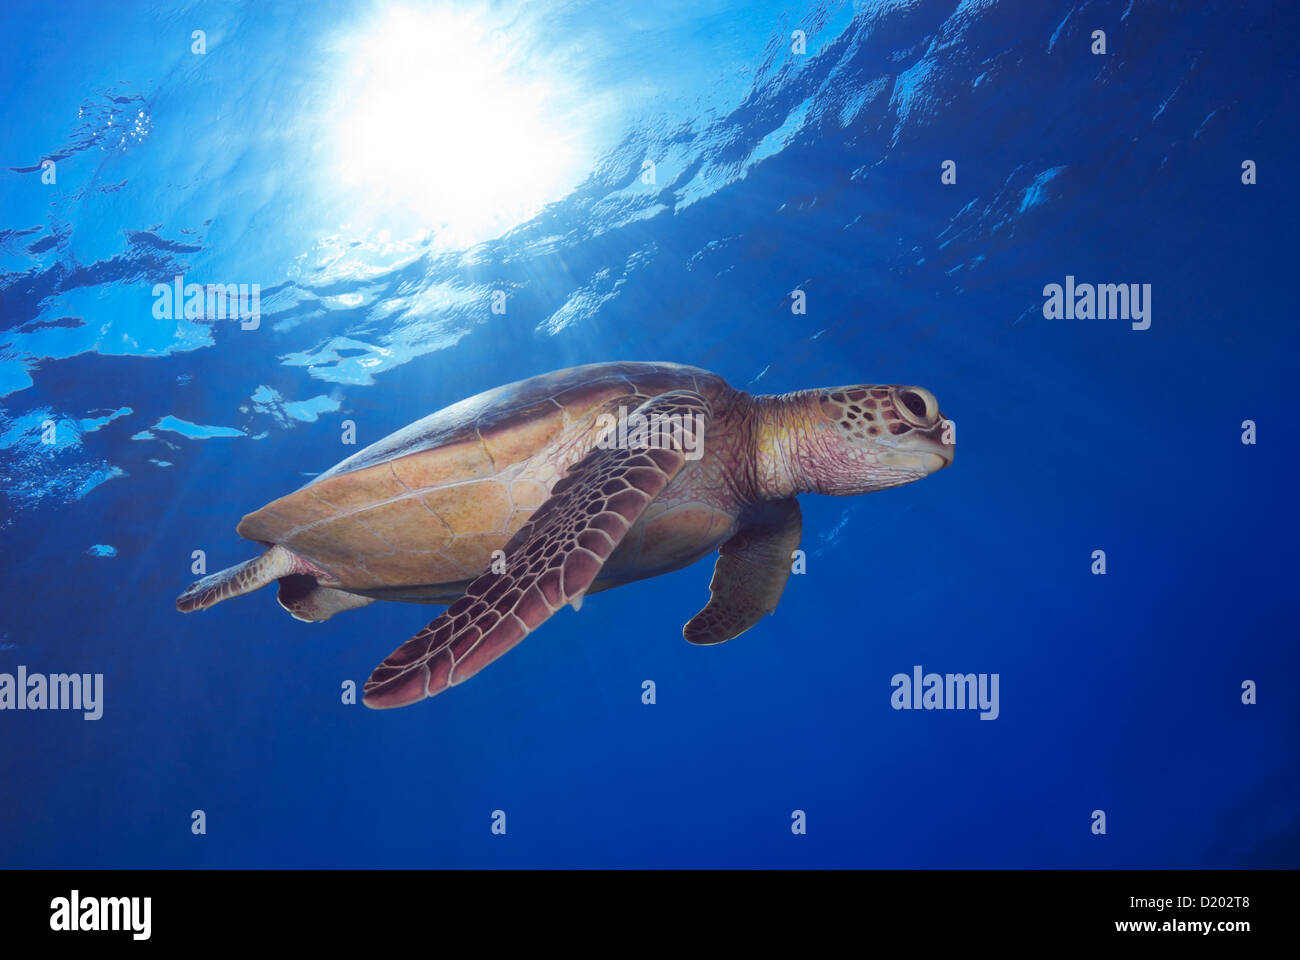 Green Sea Turtle Chelonia mydas swimming over a Coral Reef, Coral Sea, Great Barrier Reef, Pacific Ocean, Queensland Australia Stock Photo